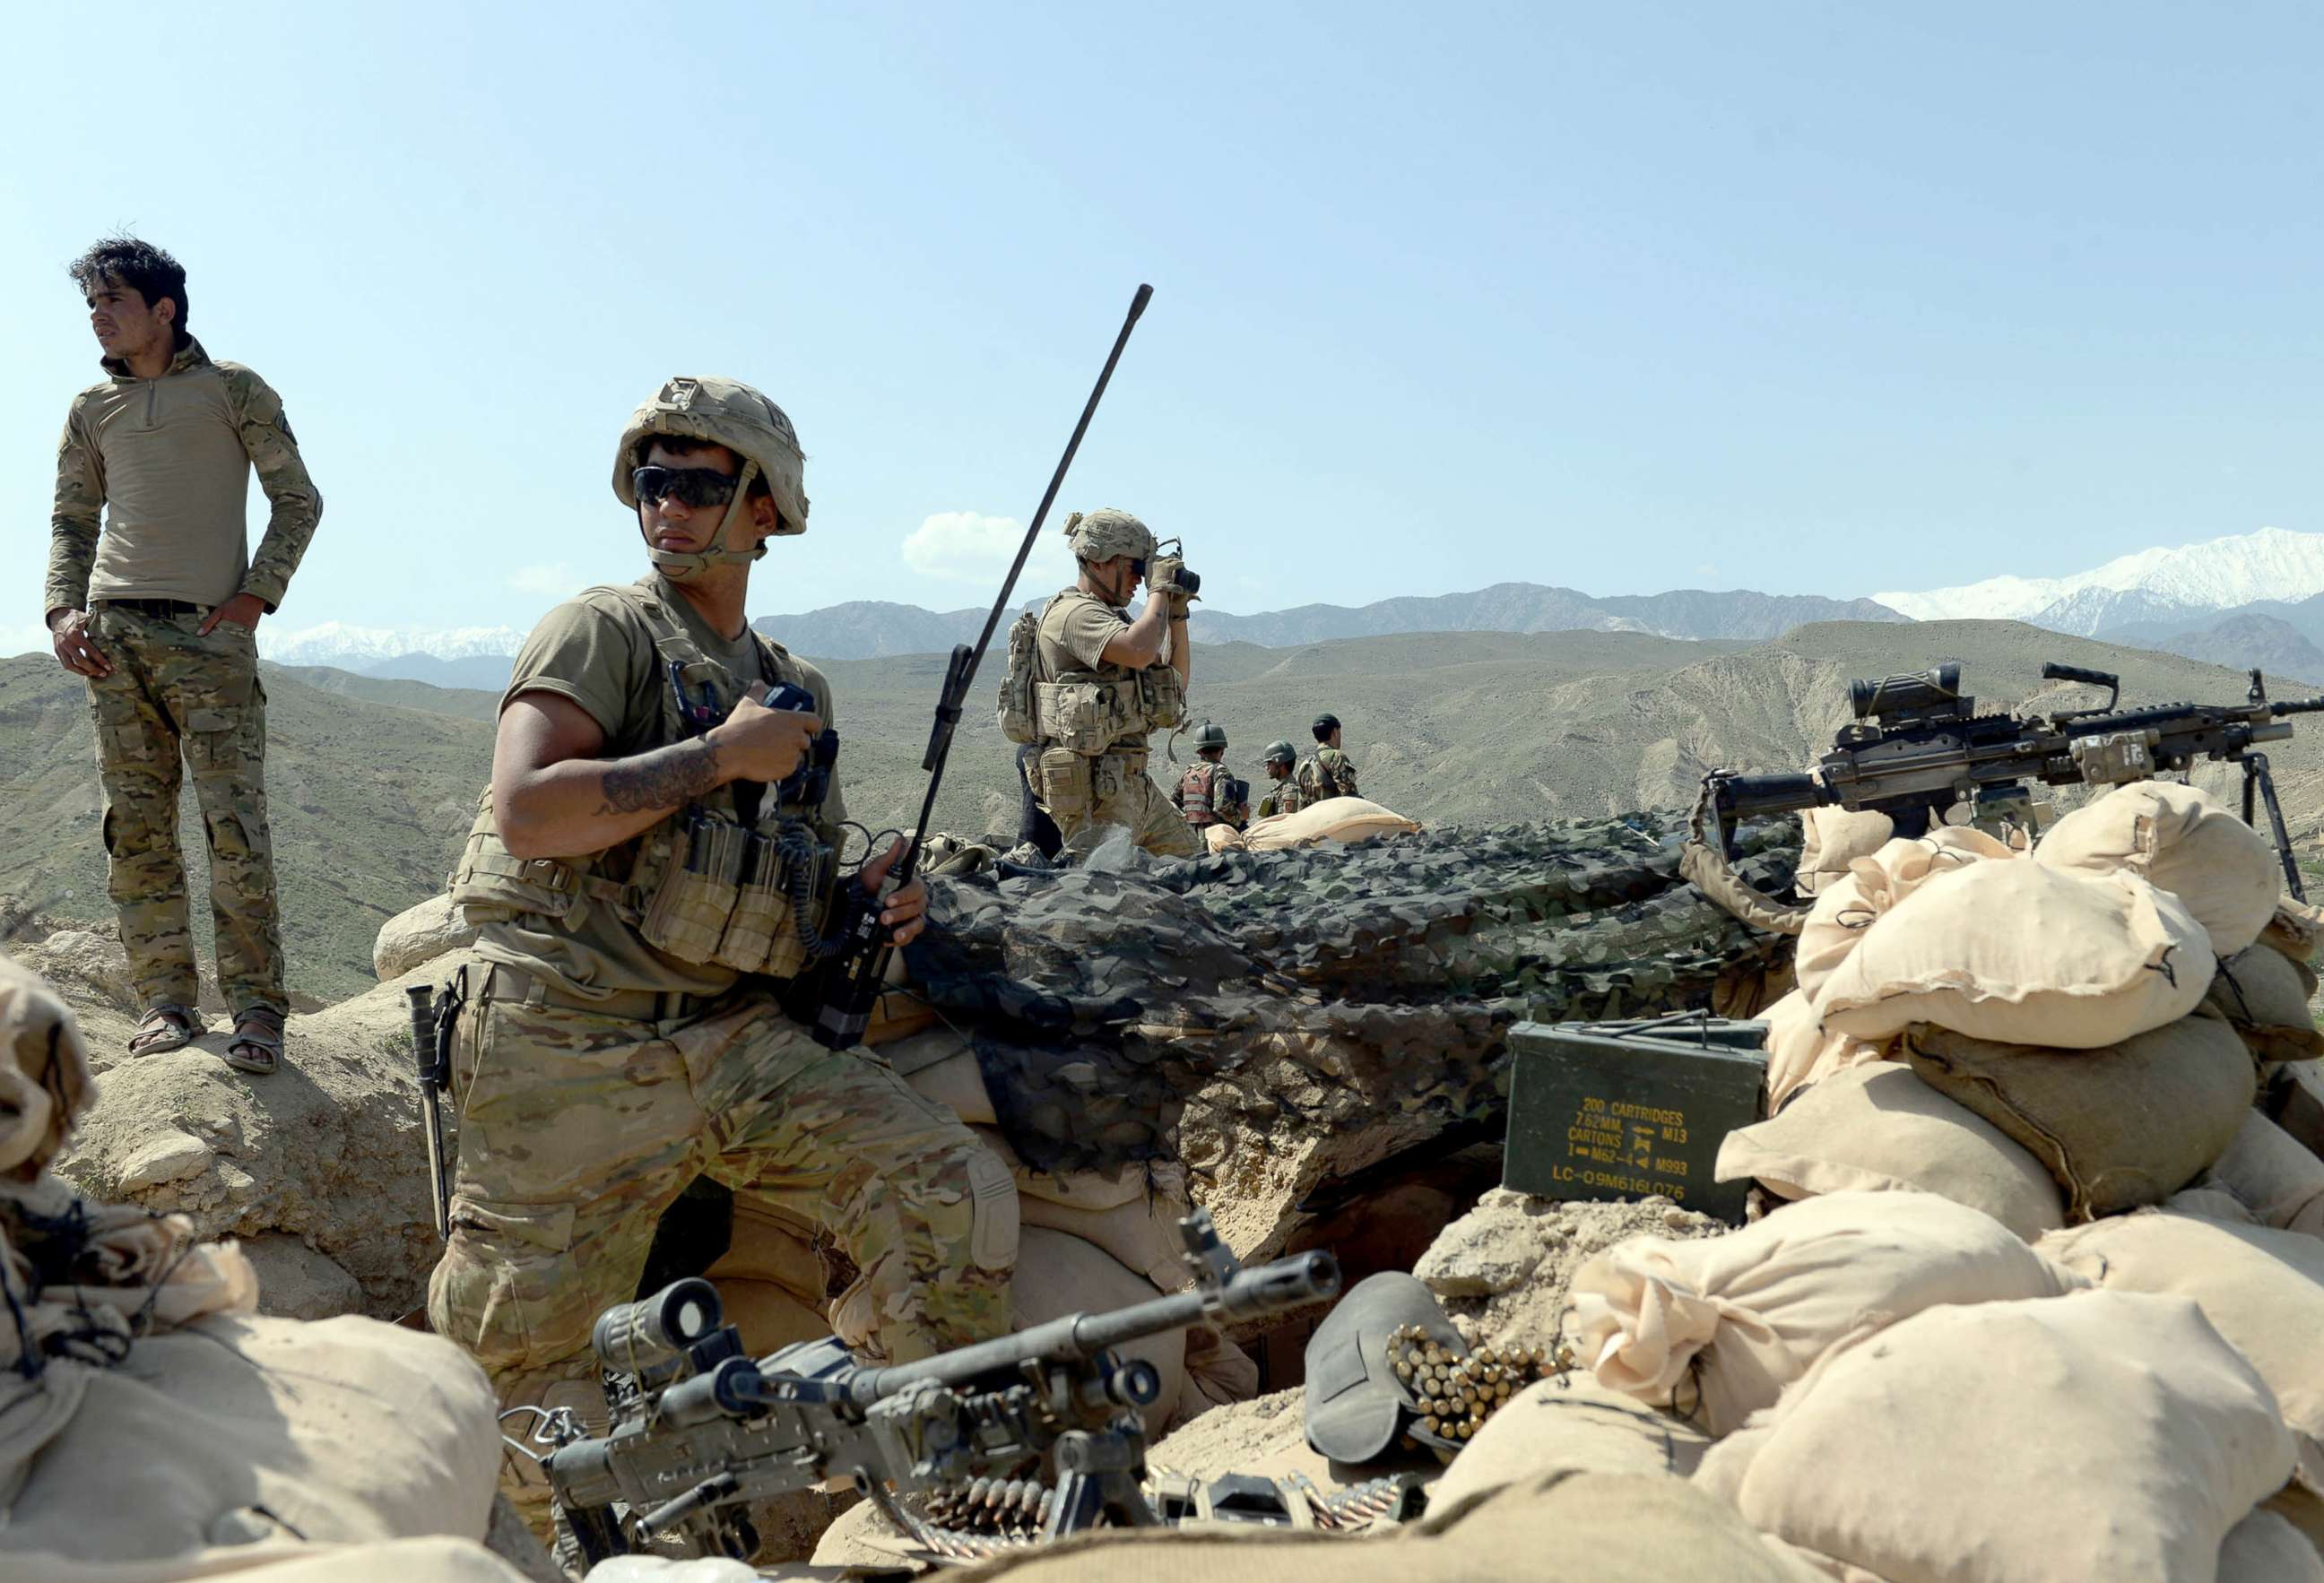 PHOTO: In this photograph taken on April 11, 2017, US soldiers take up positions during an ongoing an operation against Islamic State (IS) militants in the Achin district of Afghanistan's Nangarhar province.